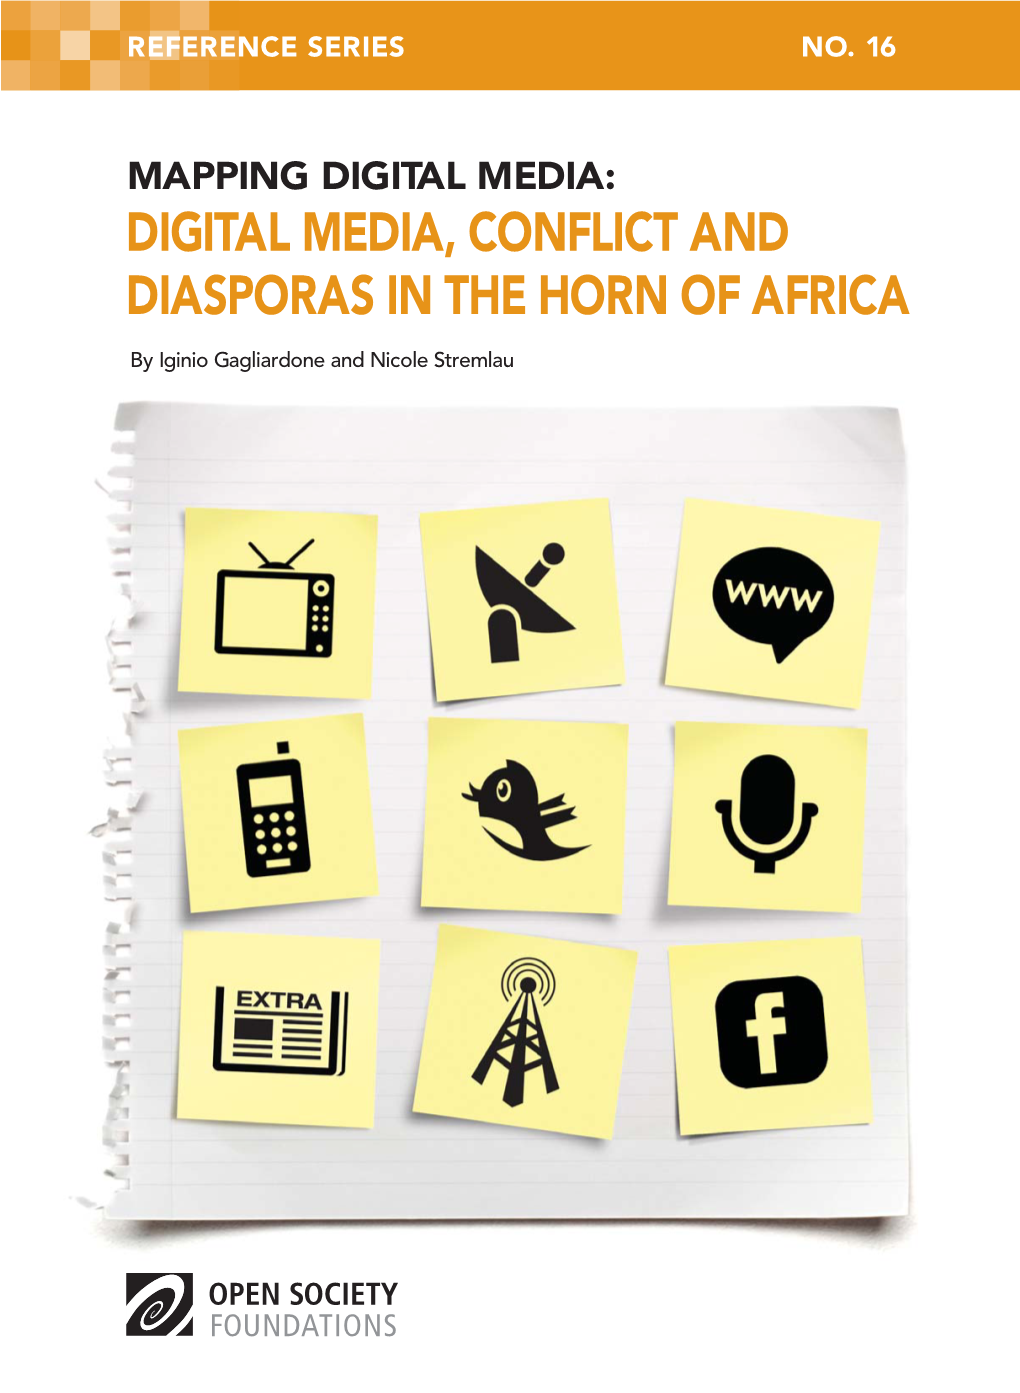 Digital Media, Conflict and Diasporas in the Horn of Africa